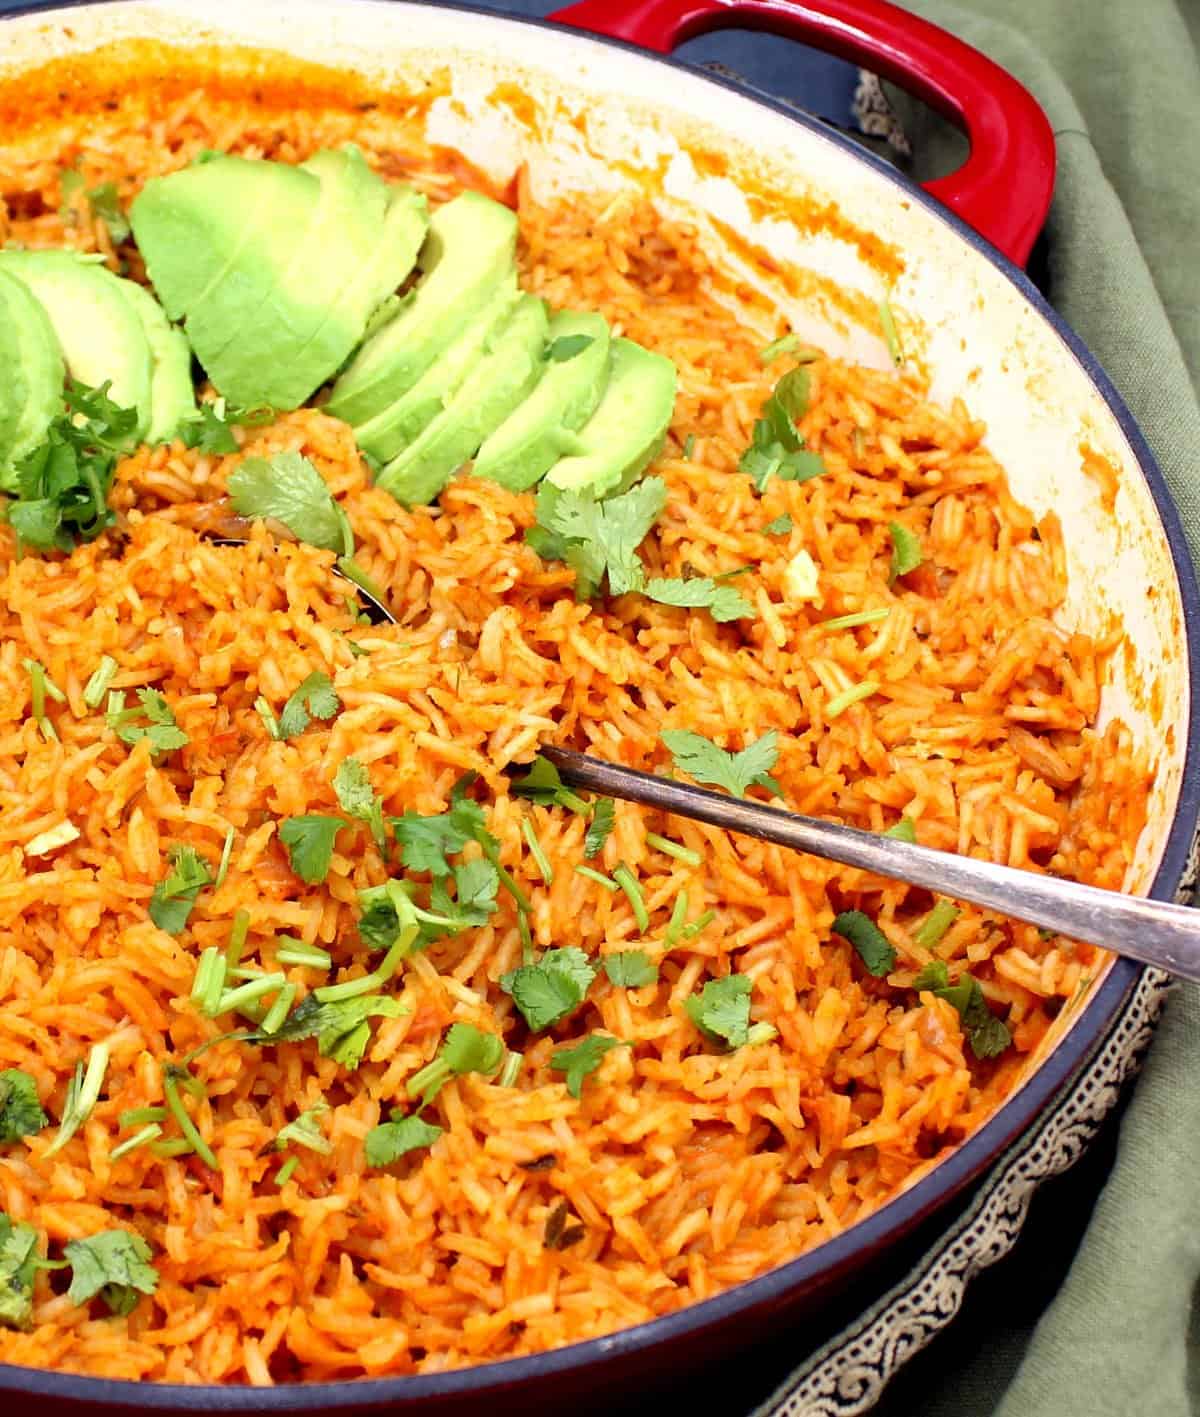 Front partial shot of Arroz Rojo, Mexican/Spanish red rice, with cilantro and avocado slices in saute pan.